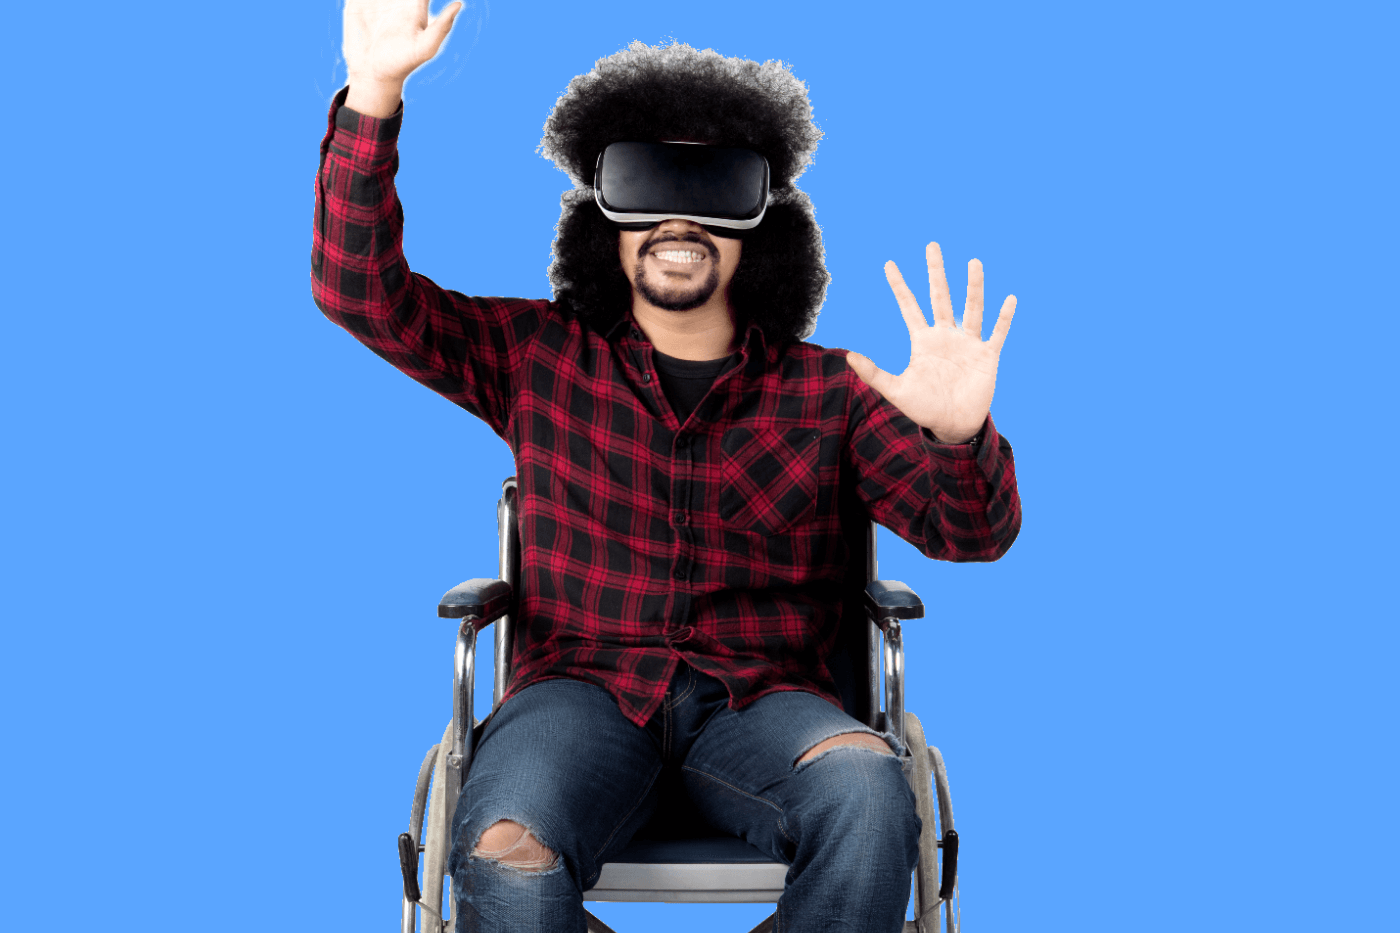 7 Benefits of AR and VR for People With Disability